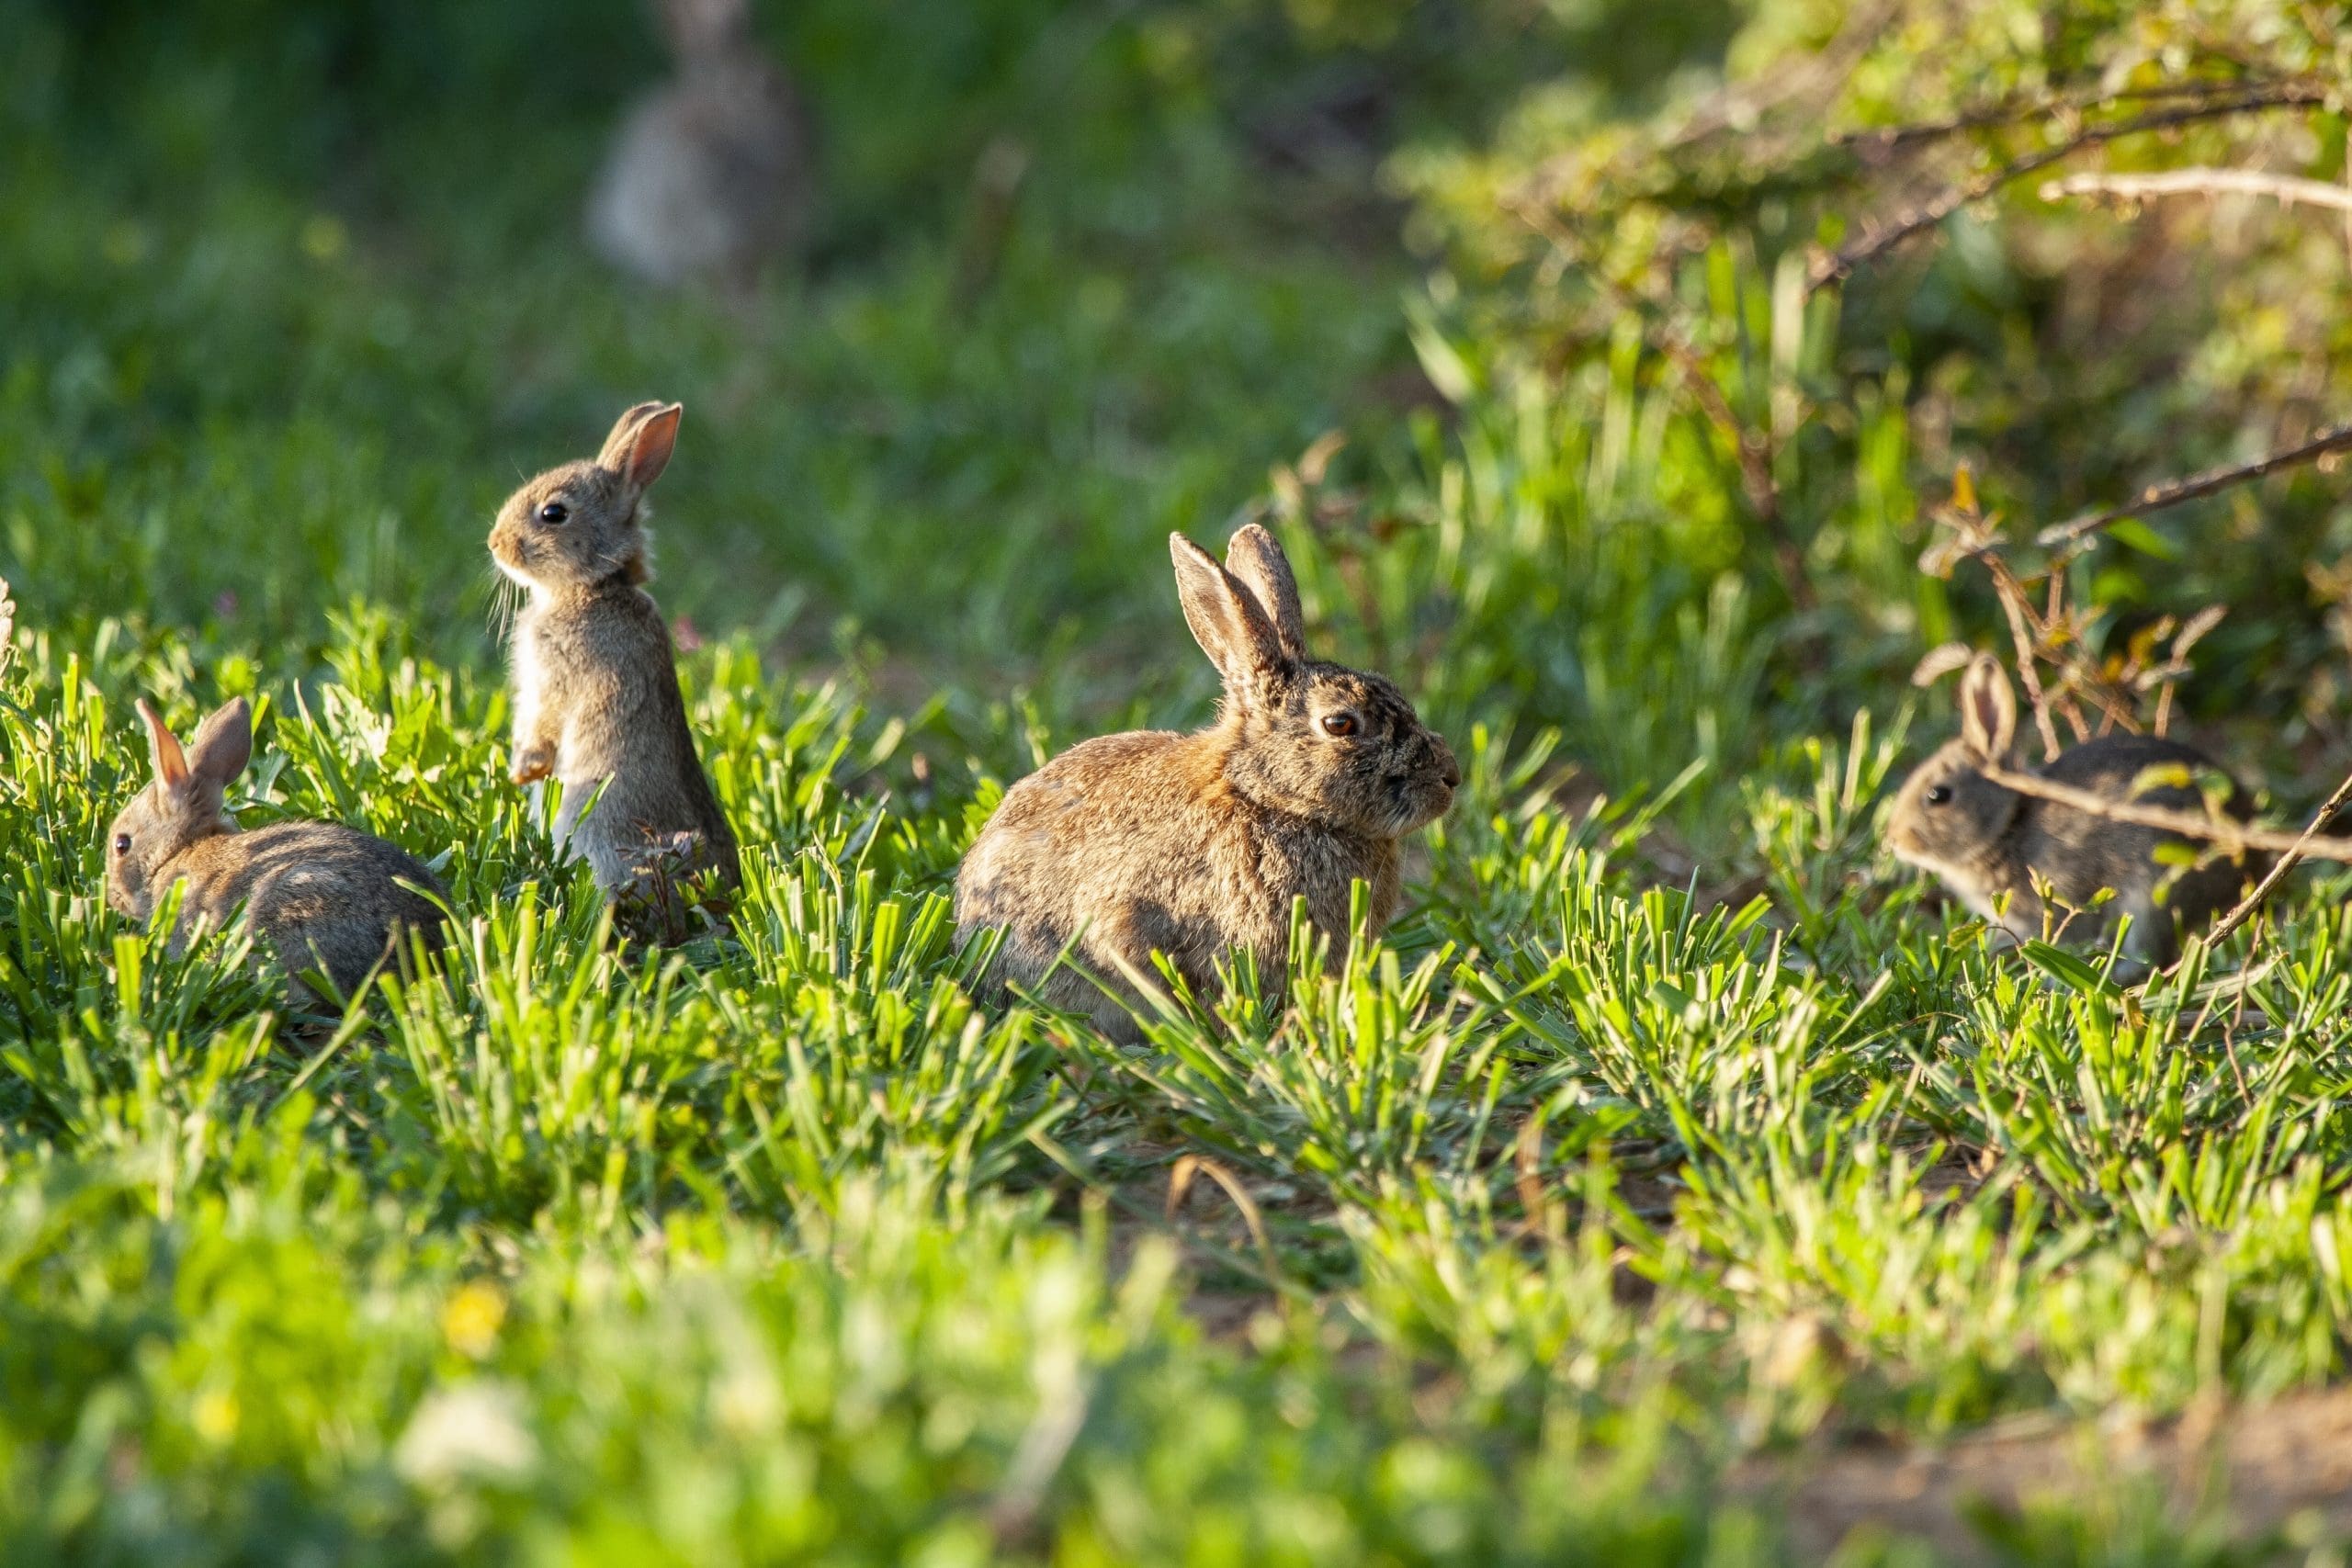 A closeup of brush rabbits in a field covered in greenery under the sunlight with a blurry background